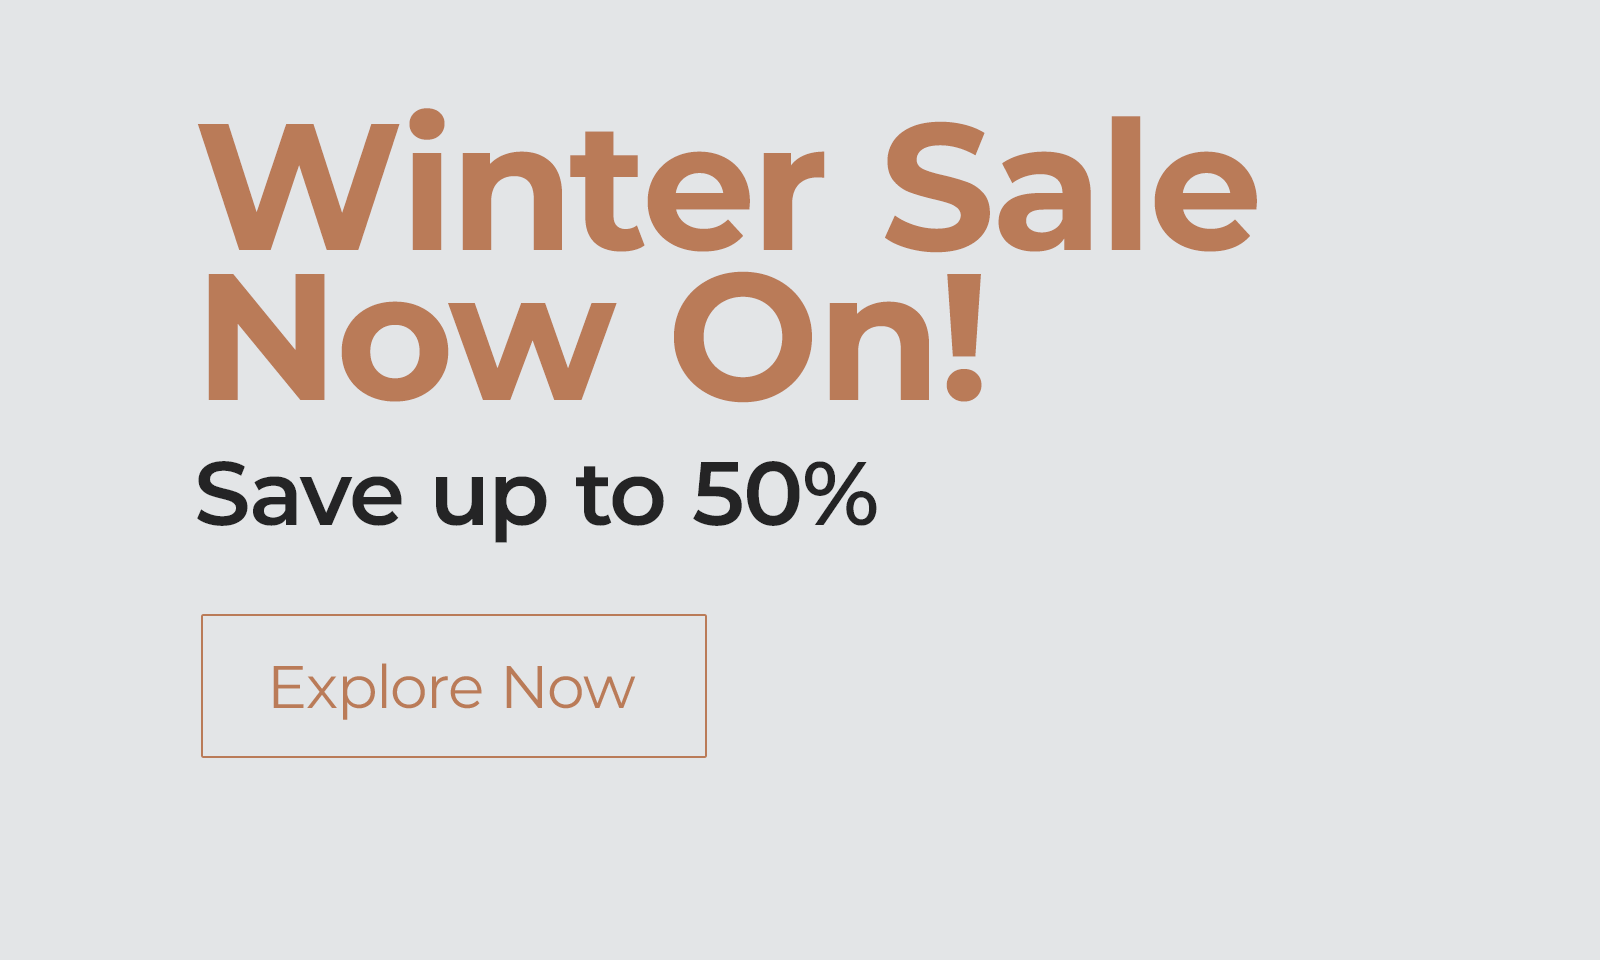 Winter Sale Now On! Save up to 50%